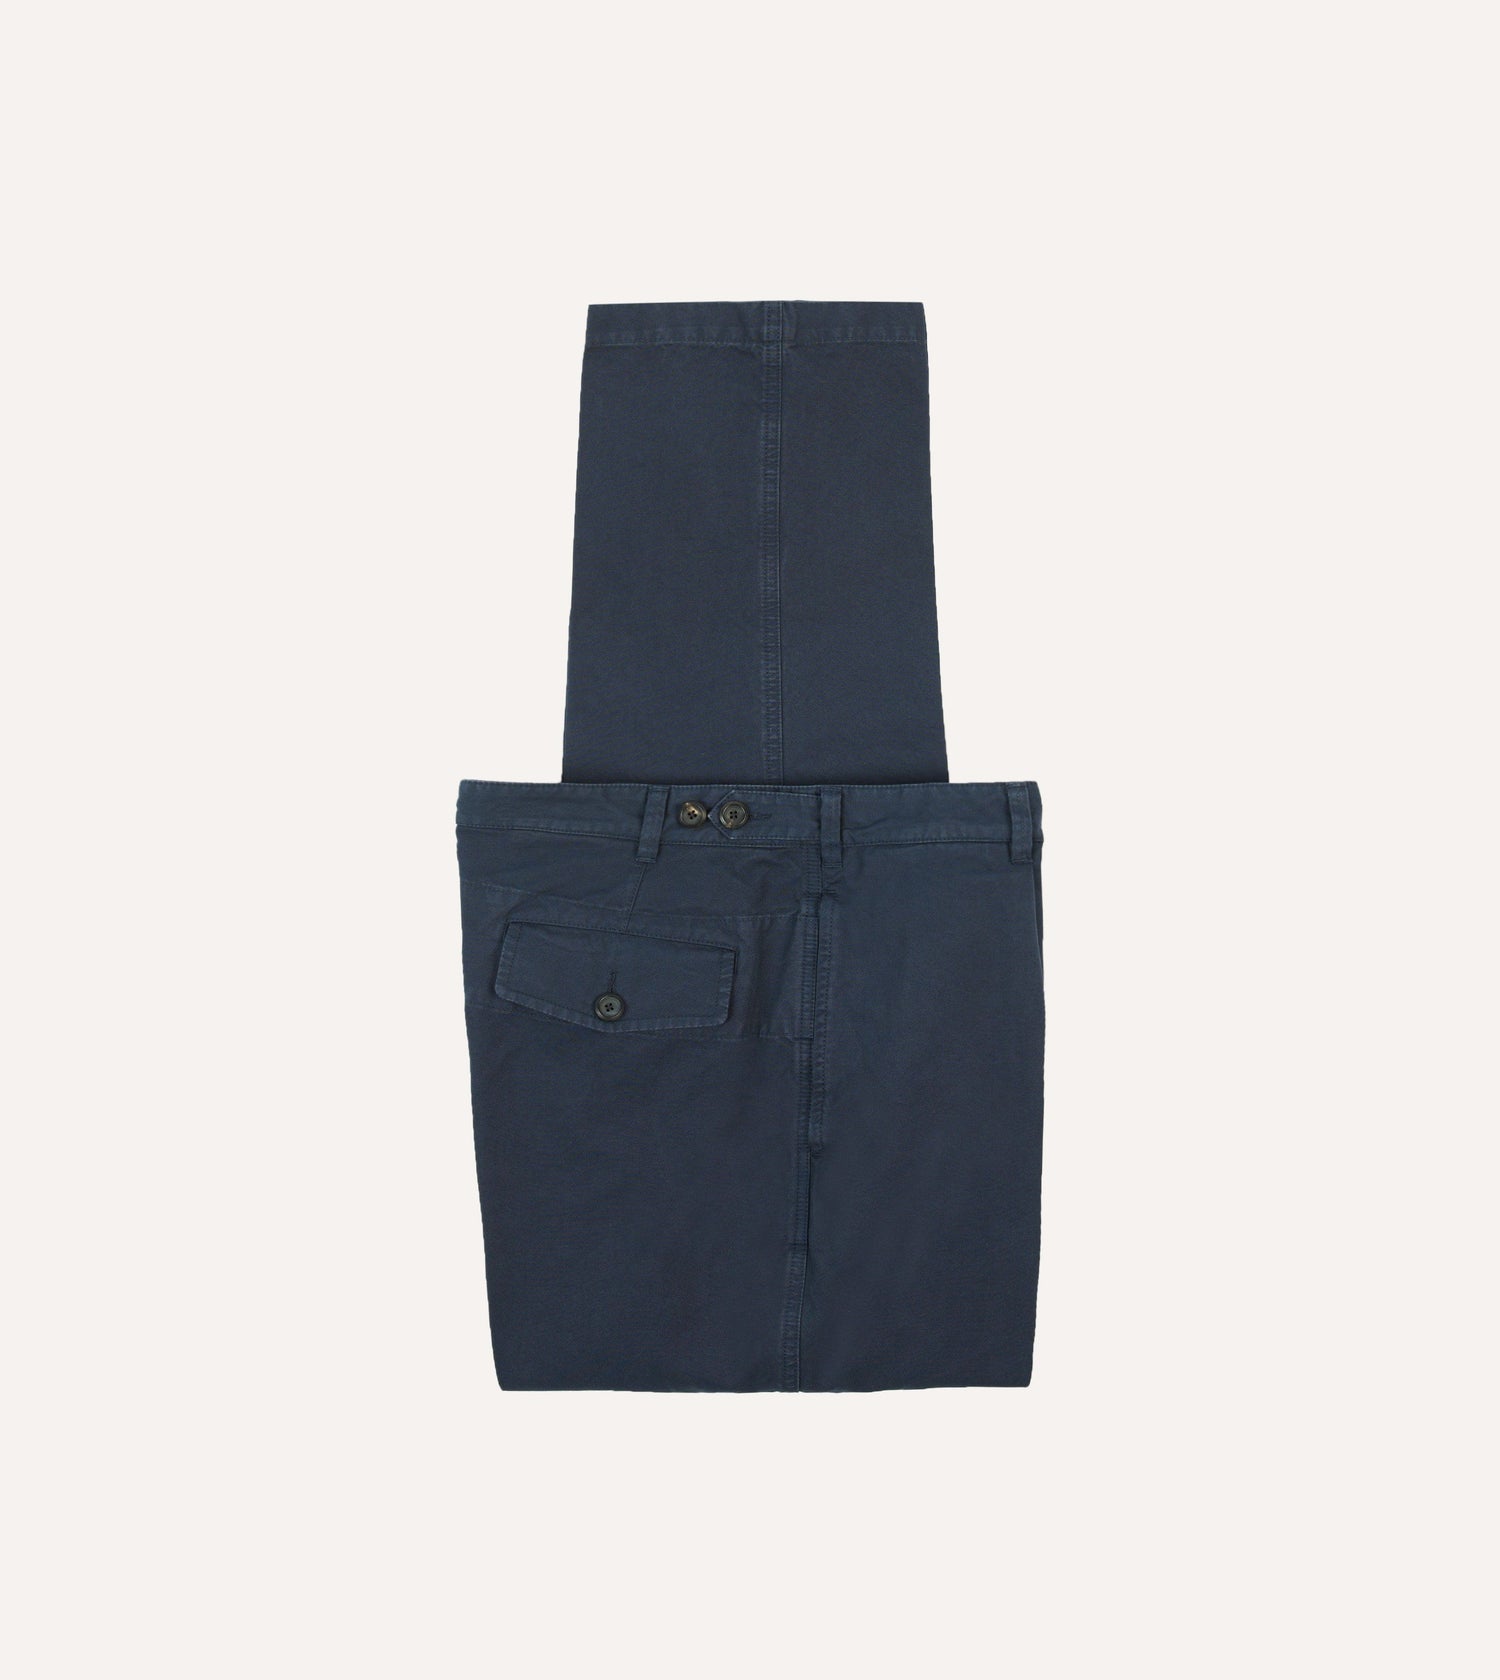 Navy Cotton Canvas Games Trousers